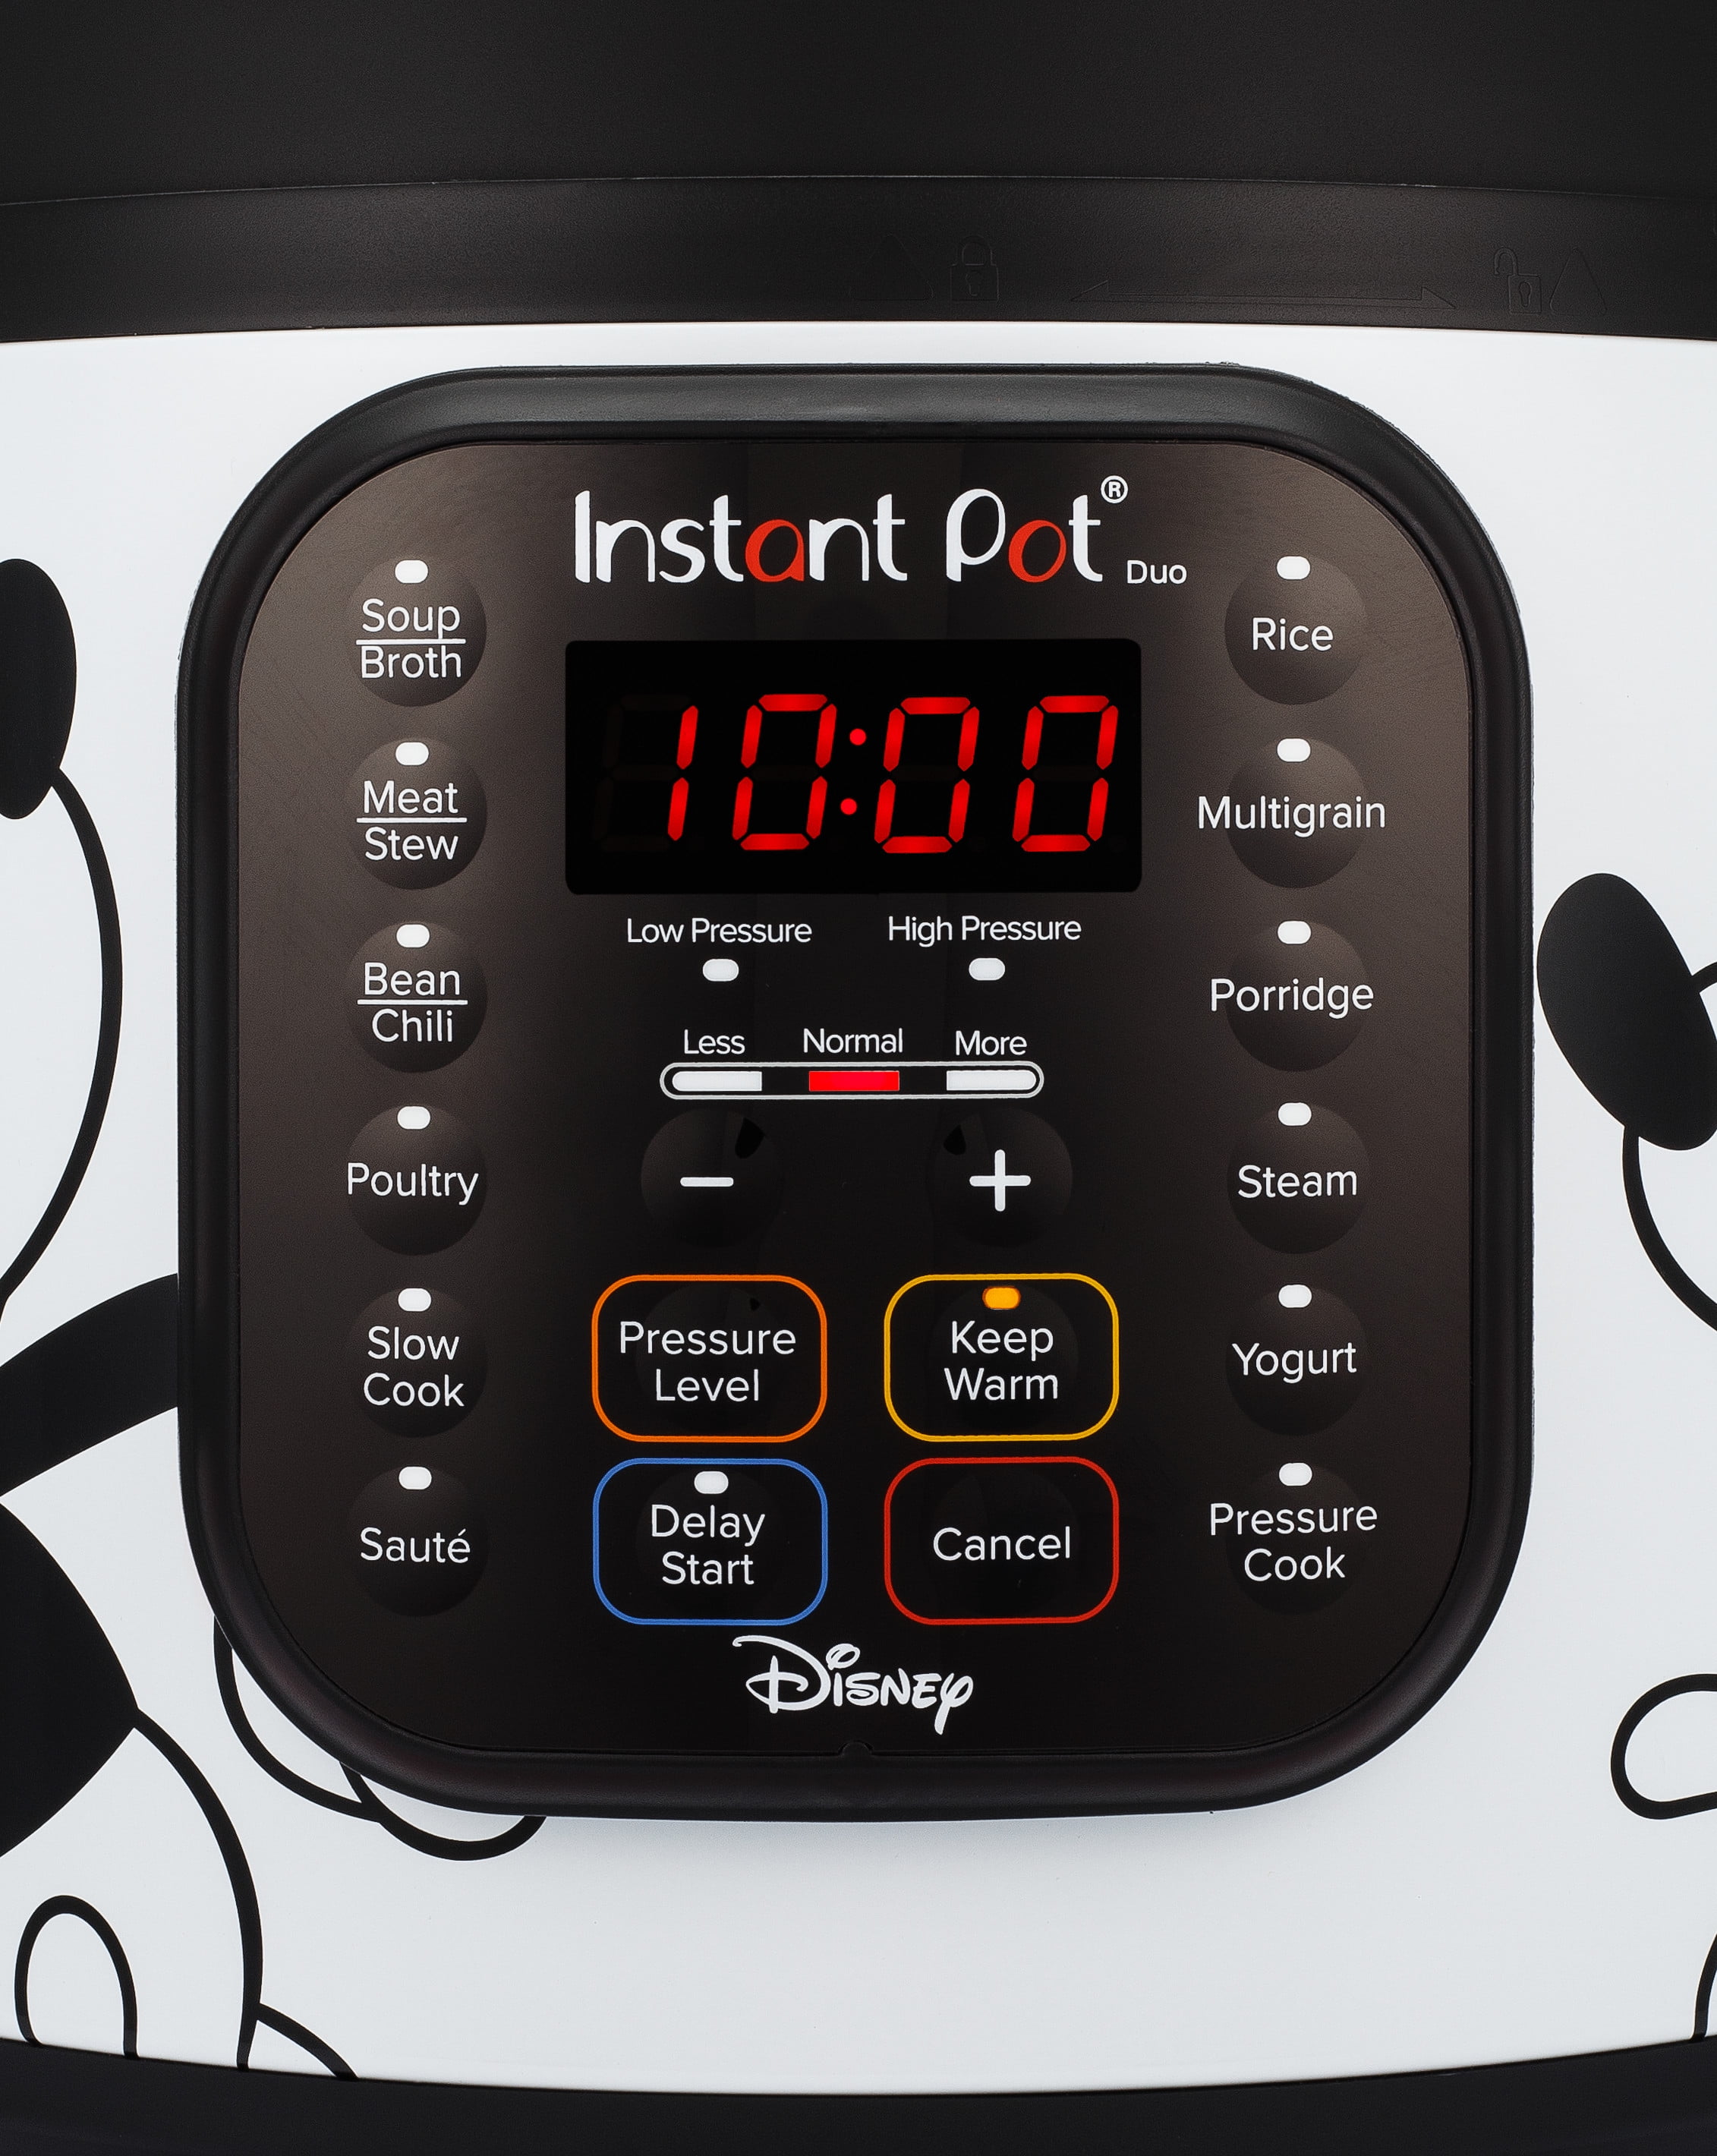 Instant Pot Duo 6 Quart Electric Pressure Cooker, 7-in-1 Multicooker,  Disney Mickey Mouse